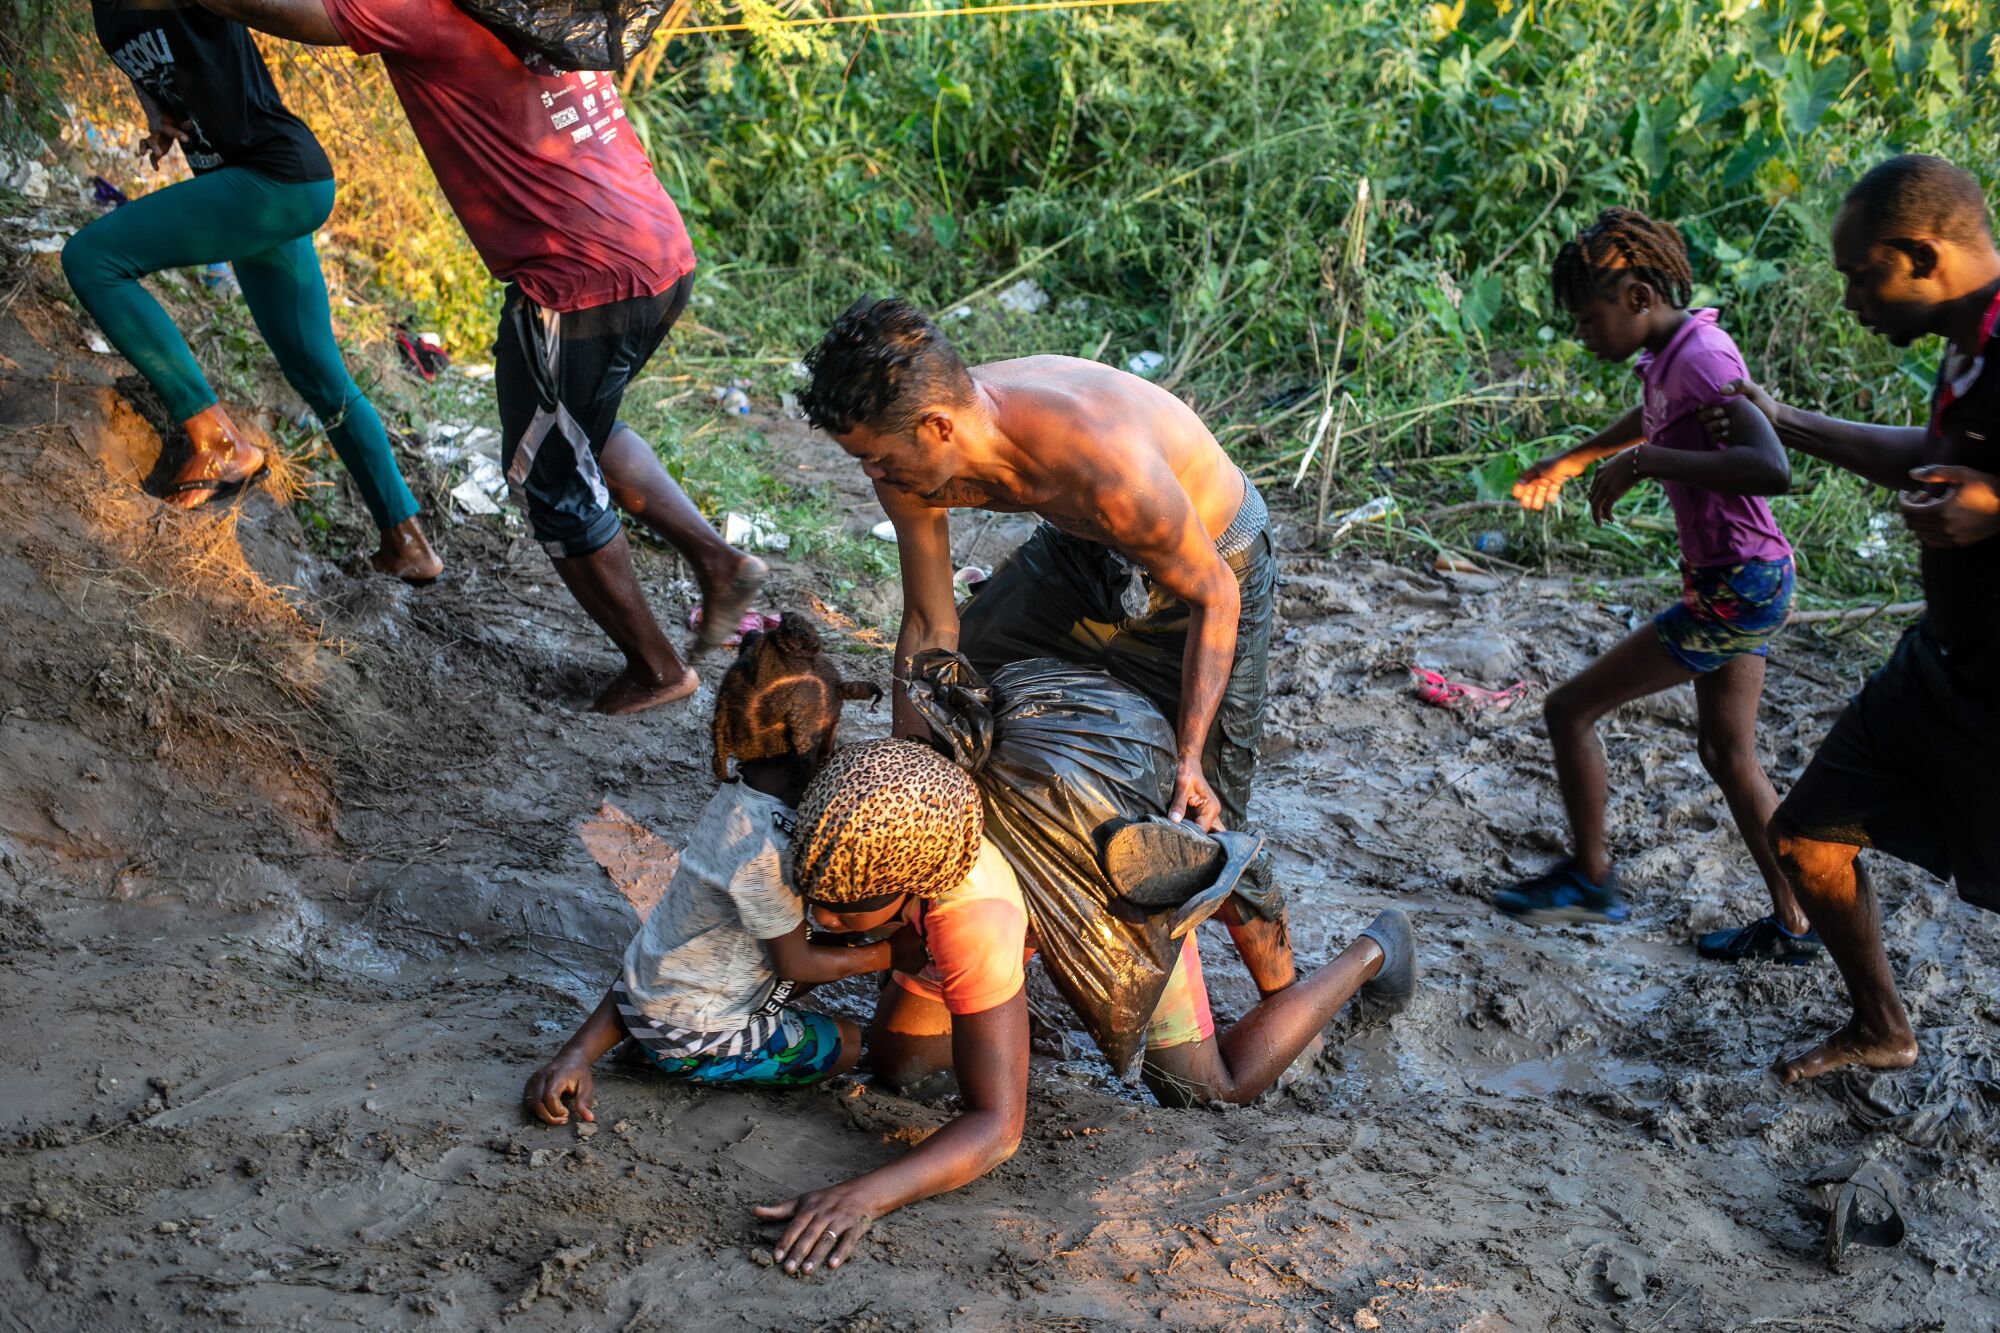 Haitian immigrants fall in the mud after wading across the Rio Grande back into Mexico from Del Rio